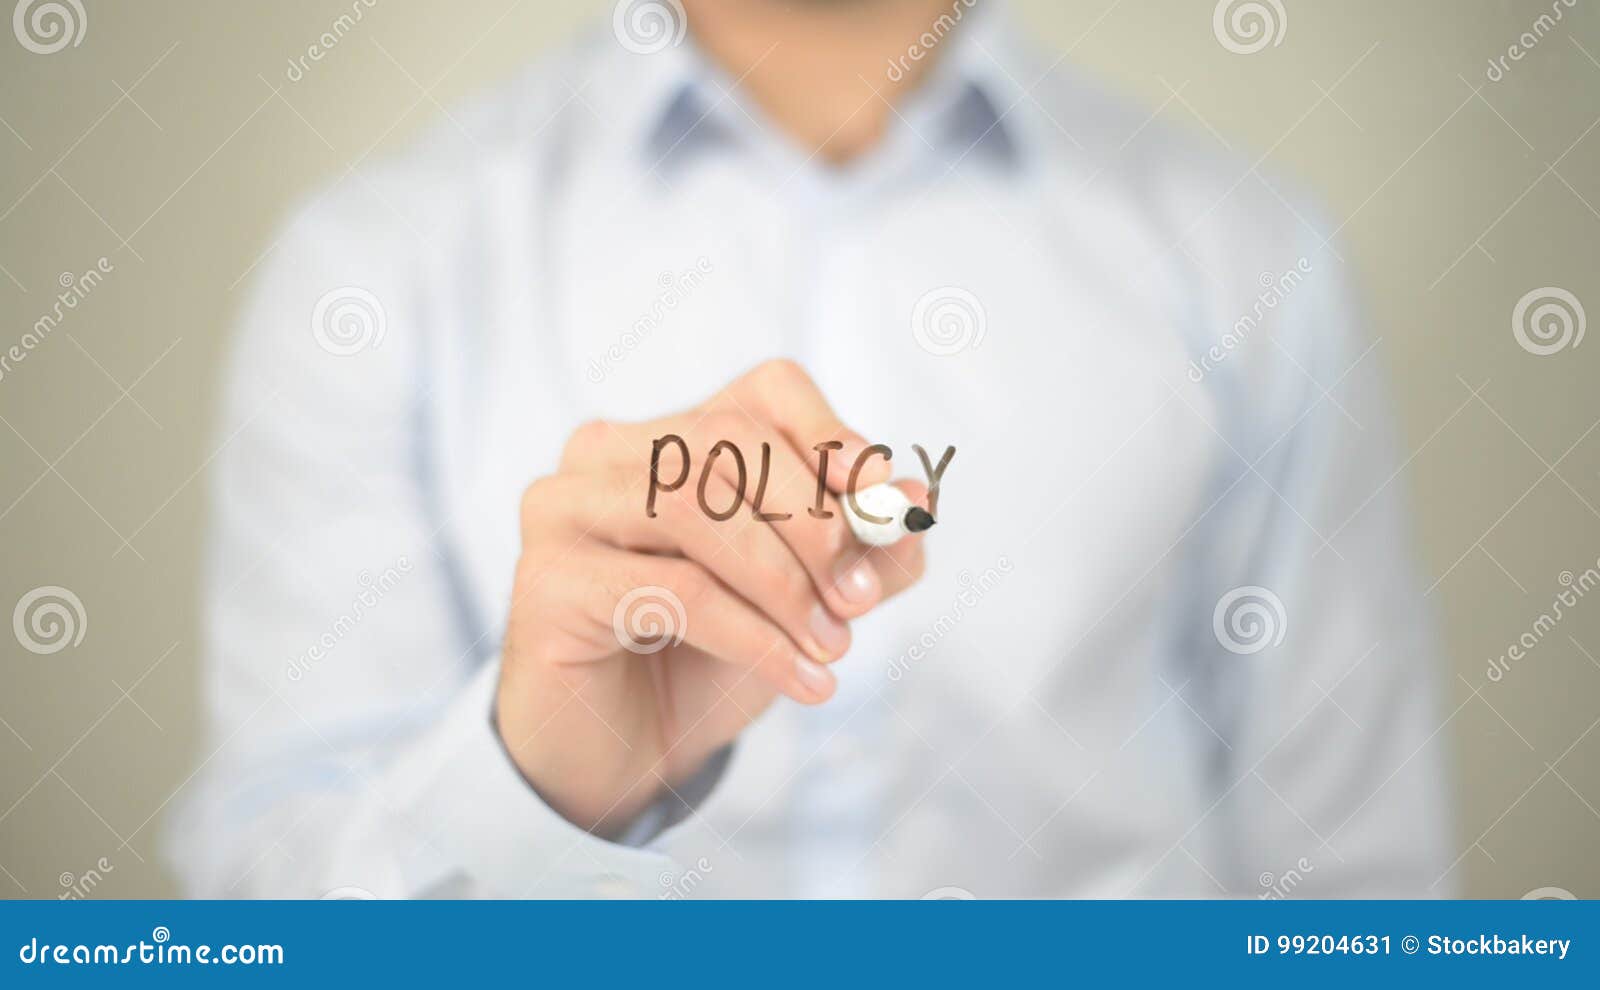 Policy , Man Writing on Transparent Screen Stock Image - Image of